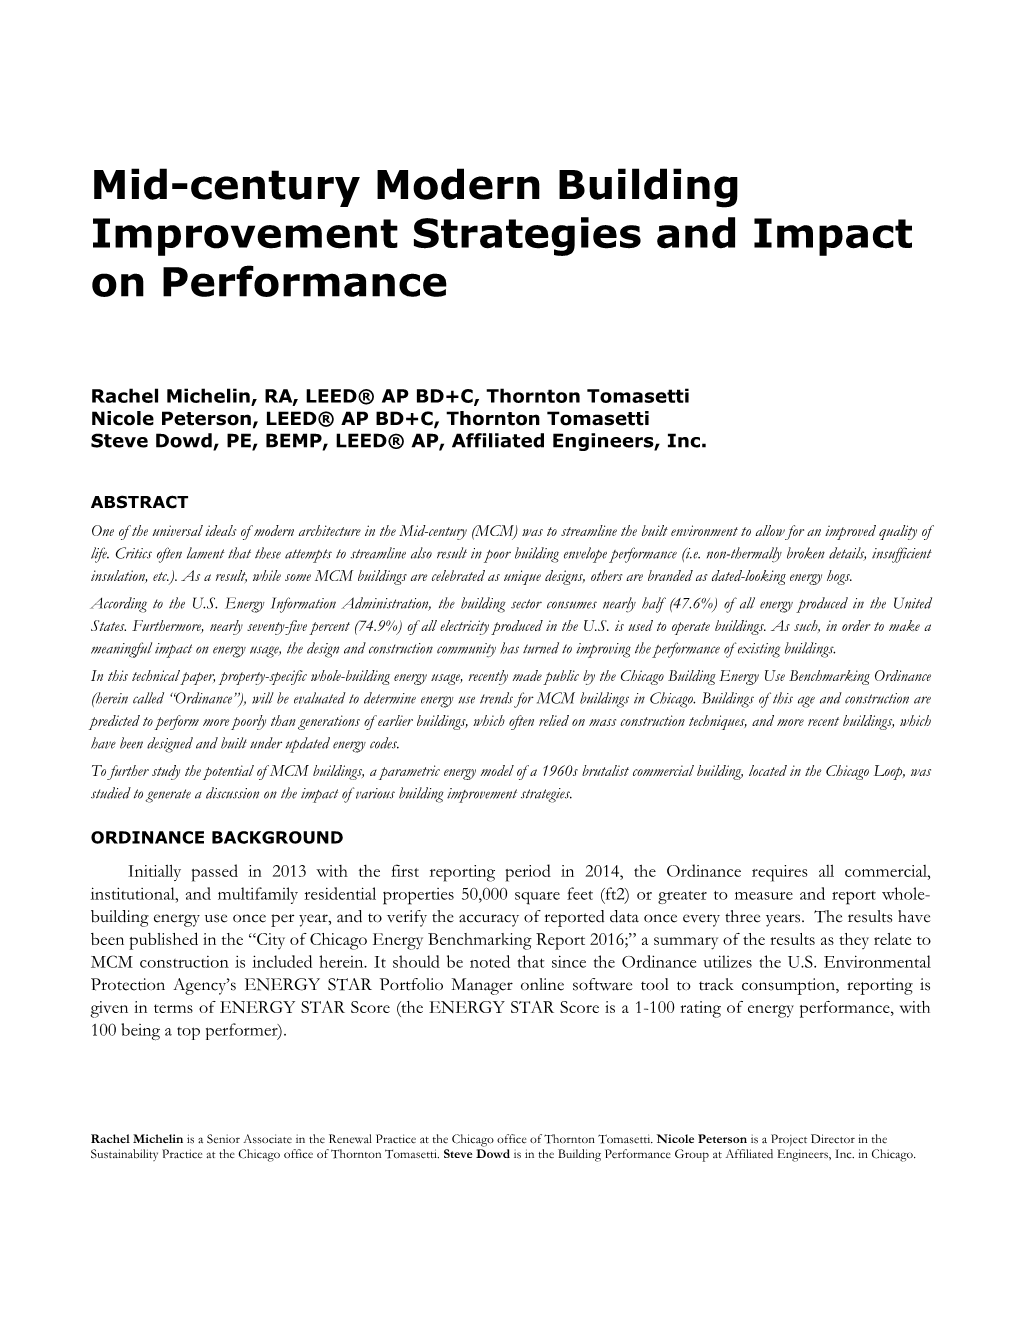 Mid-Century Modern Building Improvement Strategies and Impact on Performance